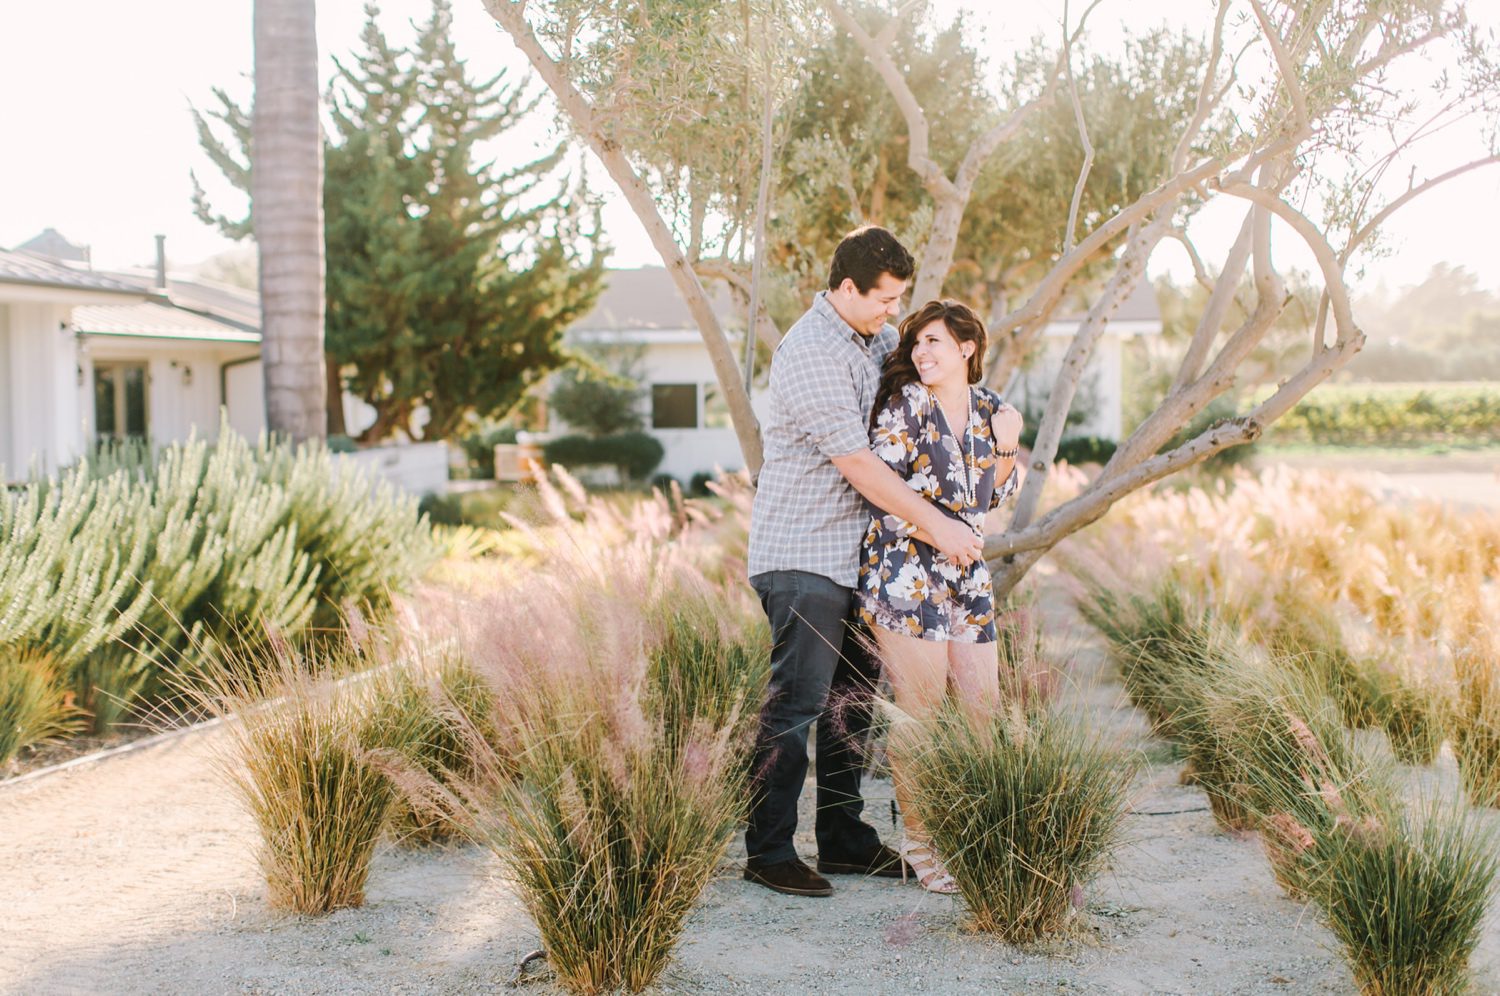 Biddle Ranch Engagement Session by San Luis Obispo photographer Jessica Sofranko